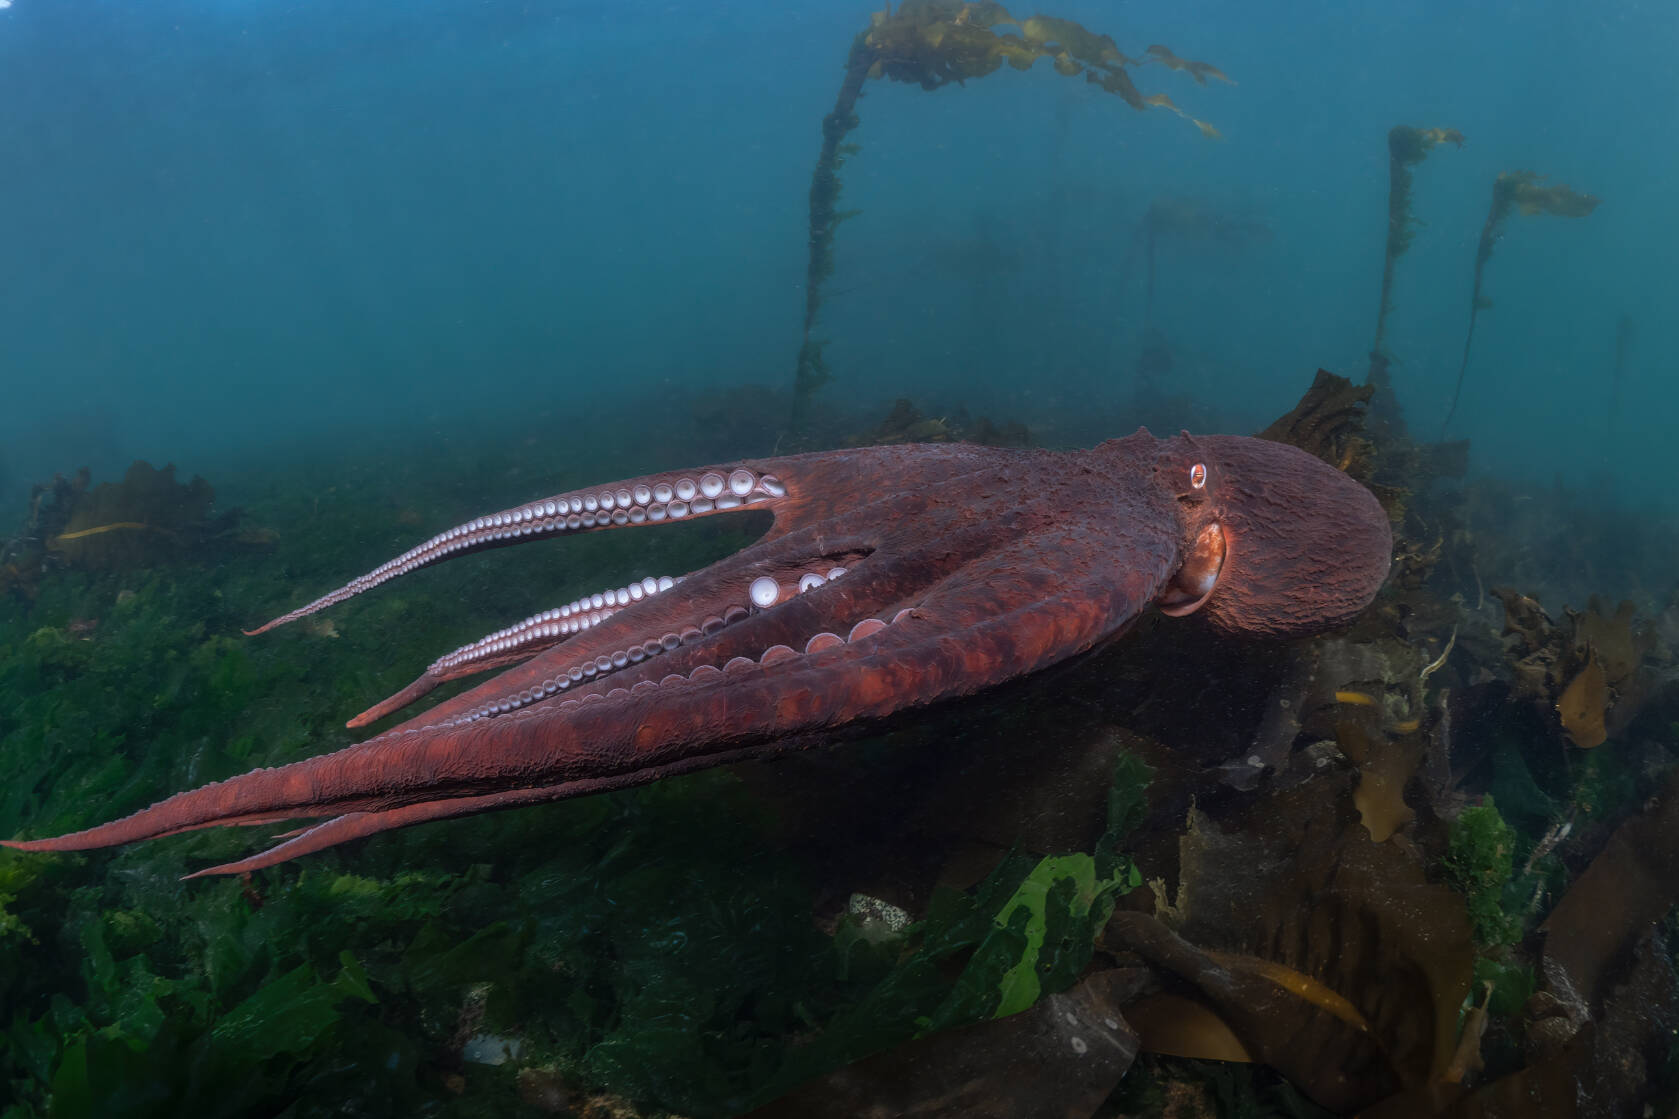 Comox Valley cinematographer and diver Maxwel Hohn captured the enigmatic giant Pacific octopus for National Geographic's Secrets of the Octopus. Photo submitted/Maxwell Hohn